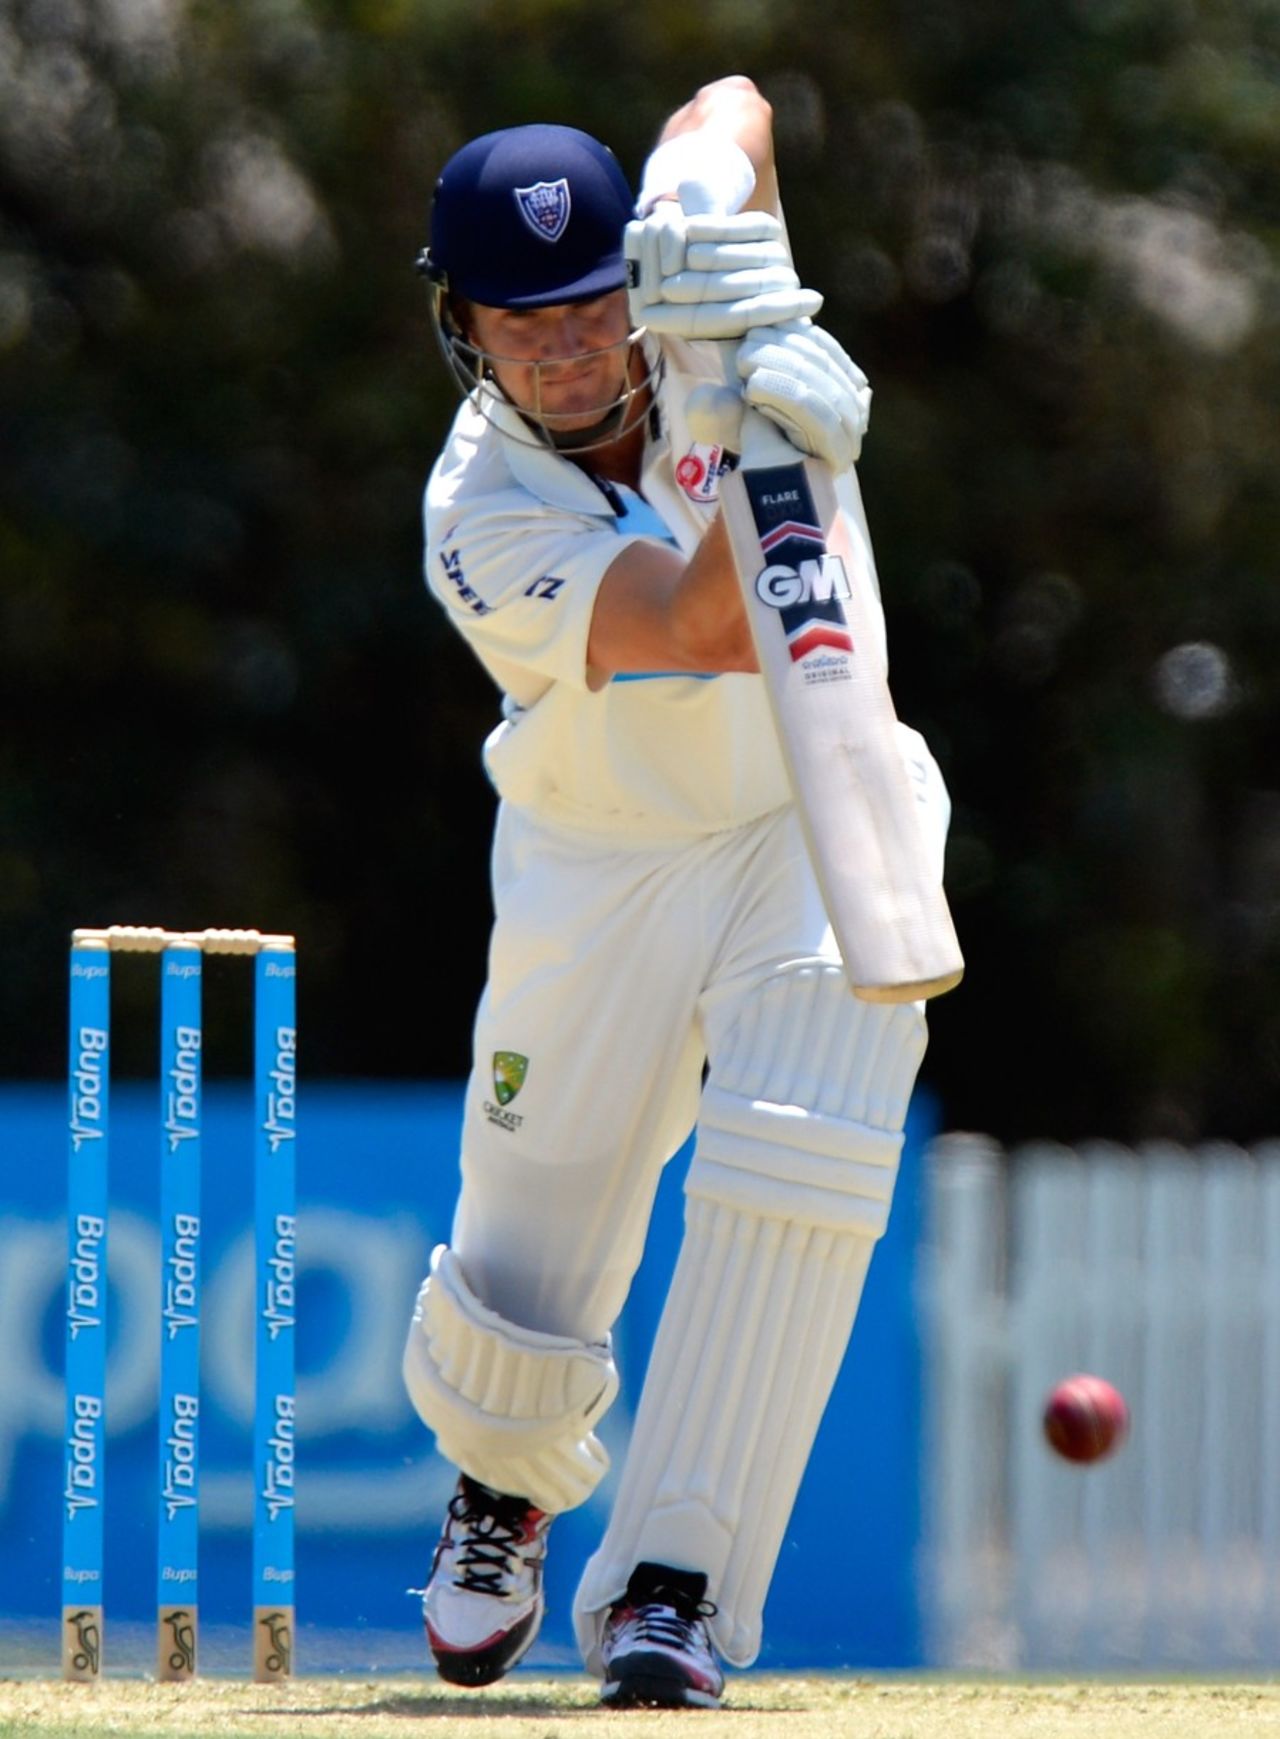 Shane Watson drives one down the ground, Queensland v New South Wales, Sheffield Shield, Brisbane, 1st day, November 2, 2012